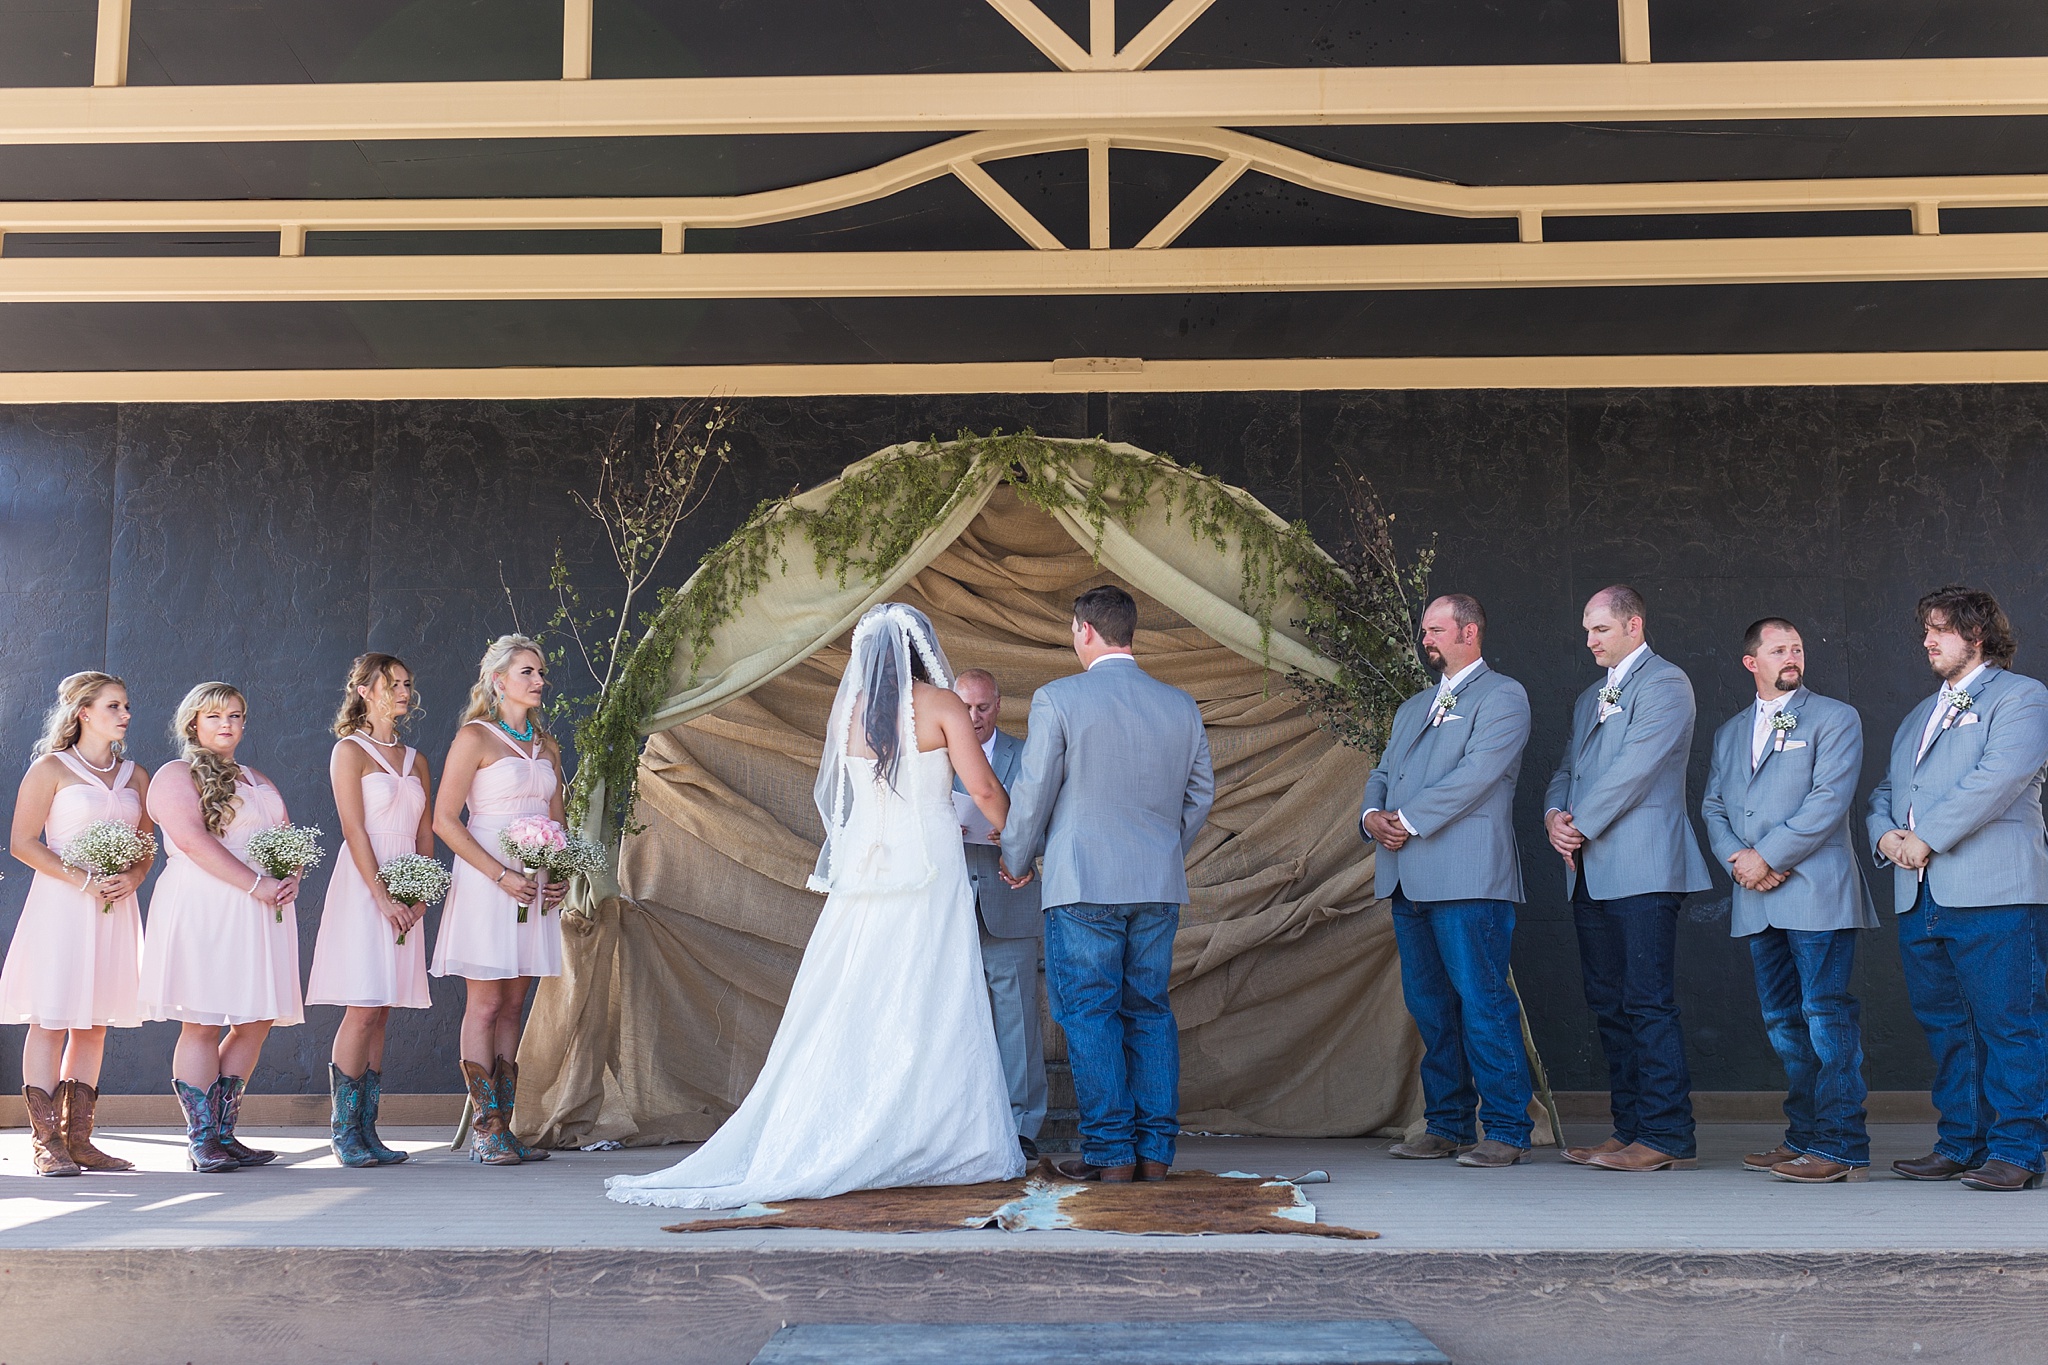 Bride & Groom exchanging vows during the ceremony. Katie & Jake’s Castle Rock Wedding at the Douglas County Fairgrounds by Colorado Wedding Photographer, Jennifer Garza. Colorado Wedding Photographer, Colorado Wedding Photography, Douglas County Fairgrounds Wedding Photography, Castle Rock Wedding Photography, Castle Rock Wedding Photographer, Colorado Wedding Photography, Colorado Wedding Photographer, Colorado Wedding, Rustic Wedding, Colorado Bride, Rocky Mountain Bride